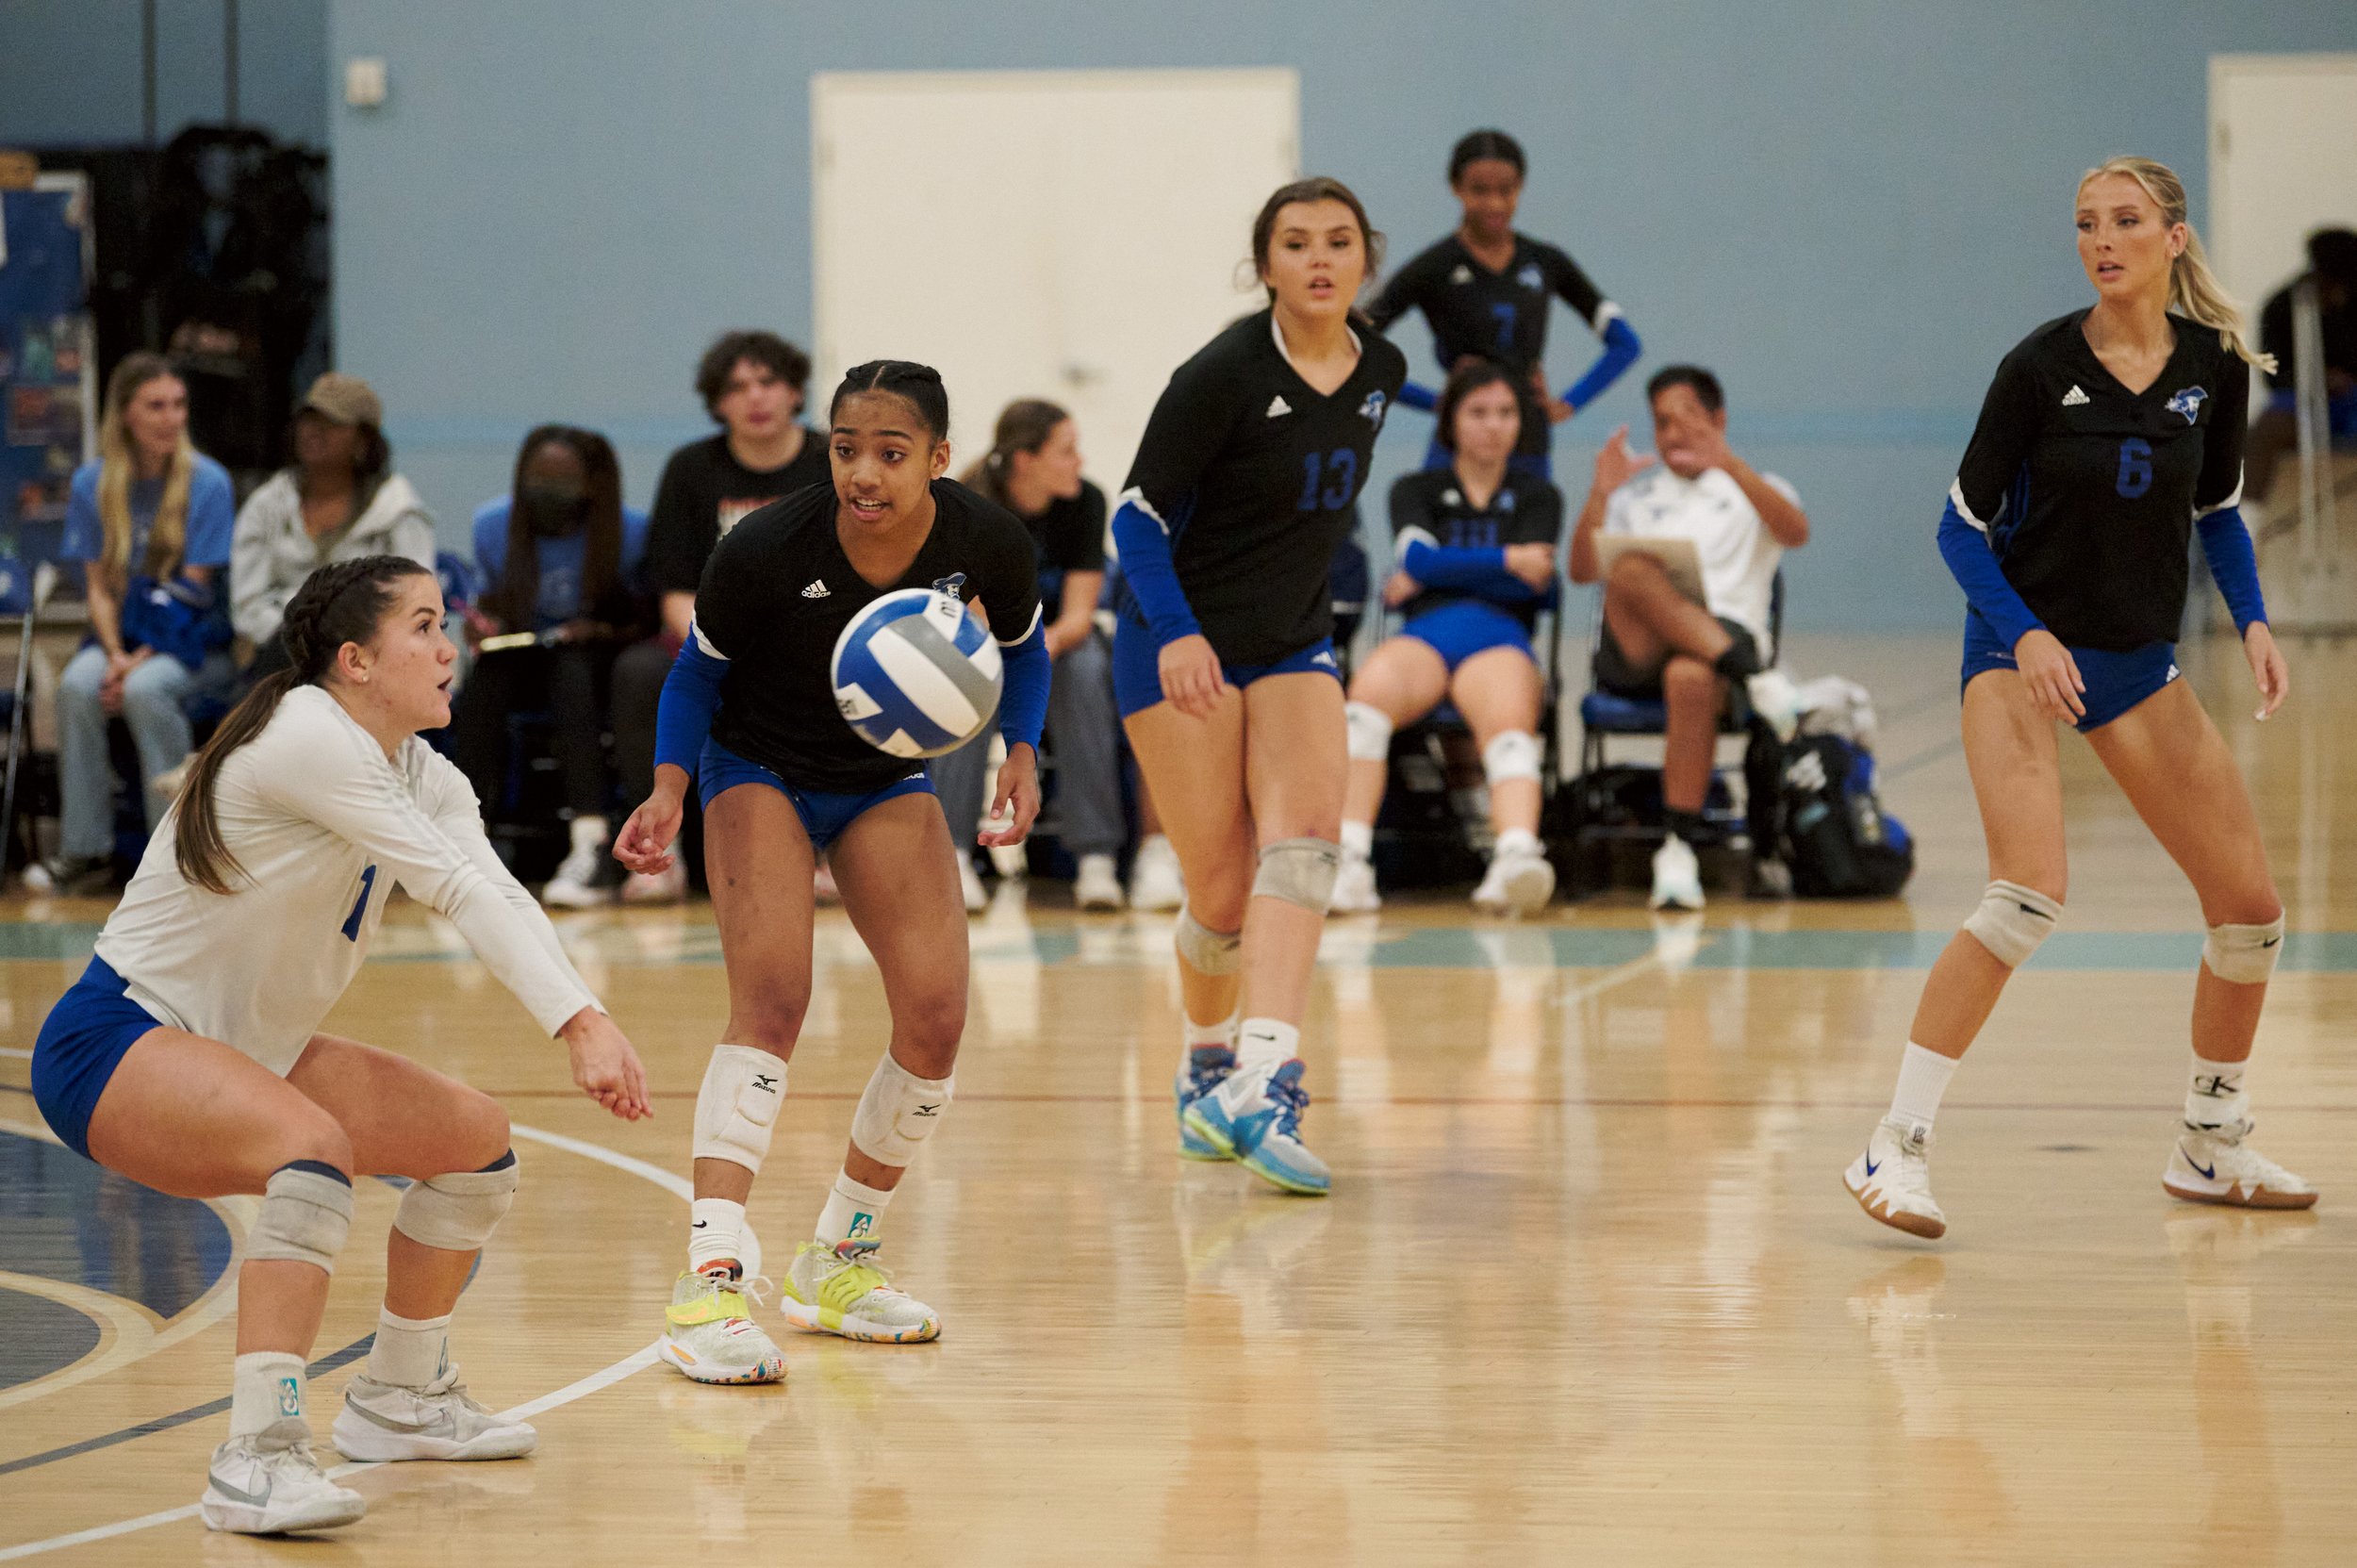  Santa Monica College Corsairs' Halle Anderson, Amaya Bernardo, Mackenzie Wolff, and Sophia Lawrance during the women's volleyball game against the West Los Angeles College Wildcats on Wednesday, Oct. 26, 2022, at SMC Gym in Santa Monica, Calif. The 